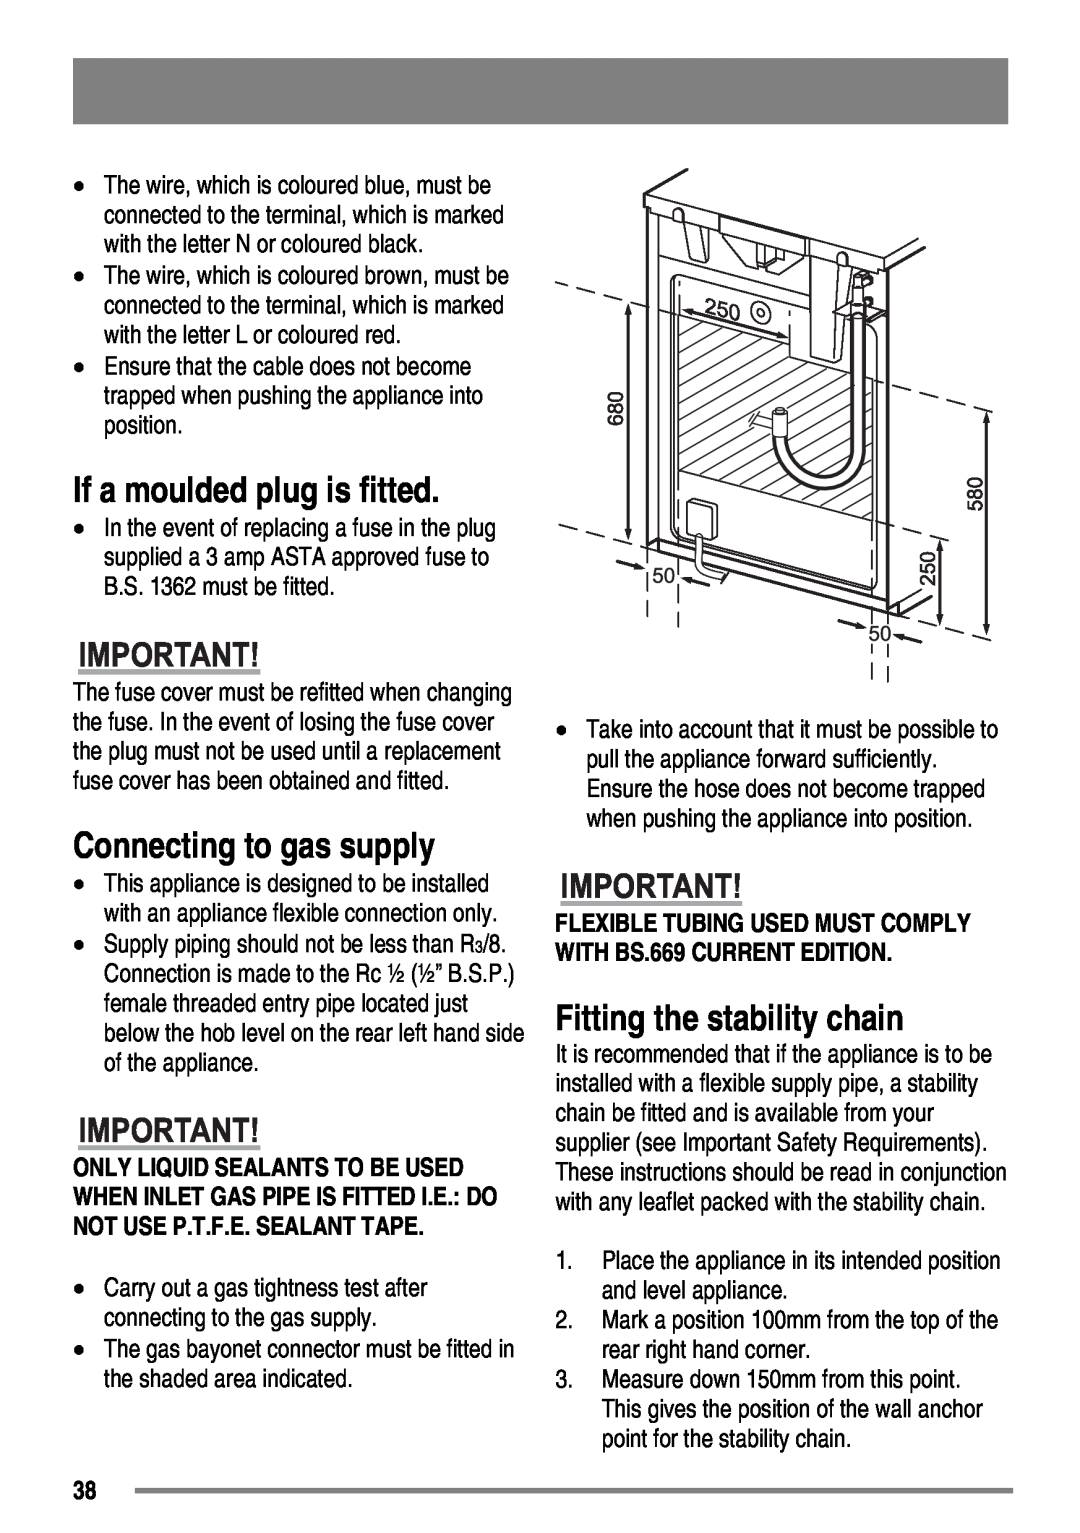 Zanussi ZKG6040 user manual If a moulded plug is fitted, Connecting to gas supply, Fitting the stability chain 